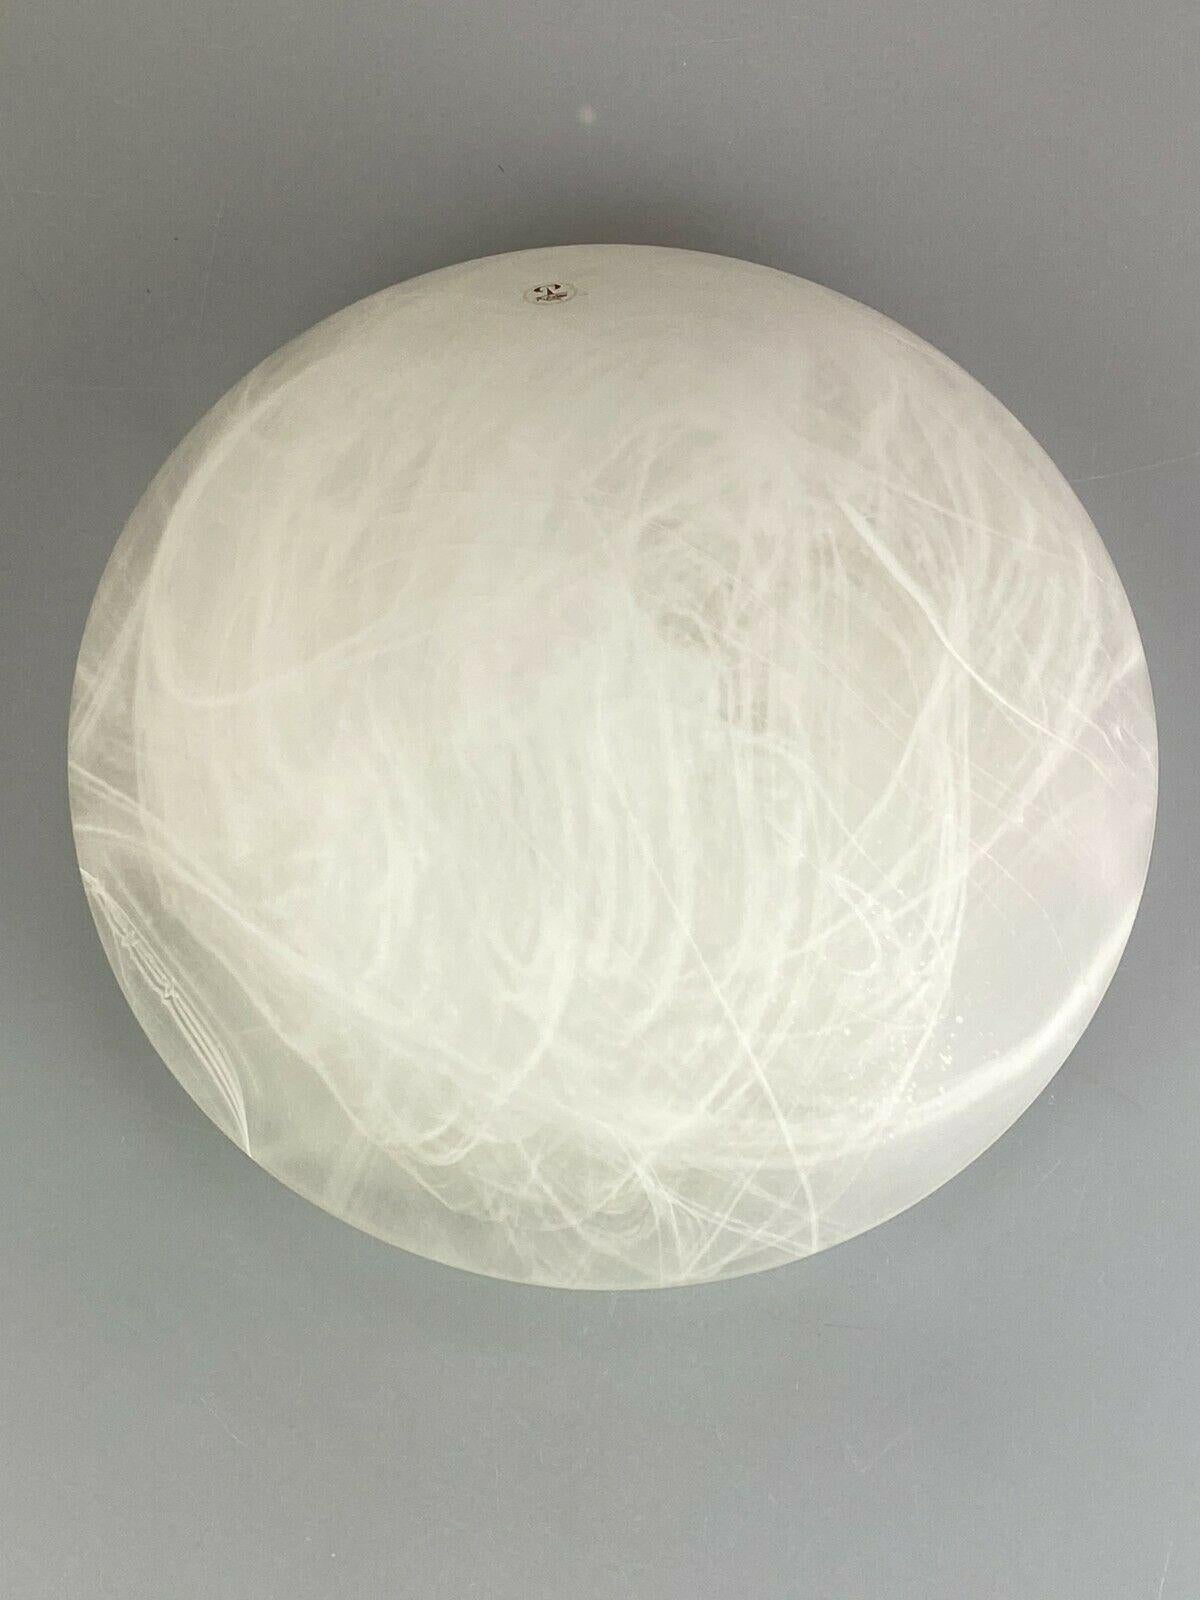 60s 70s Peill & Putzler Plafoniere Ceiling Lamp Glass Space Design Lamp For Sale 2